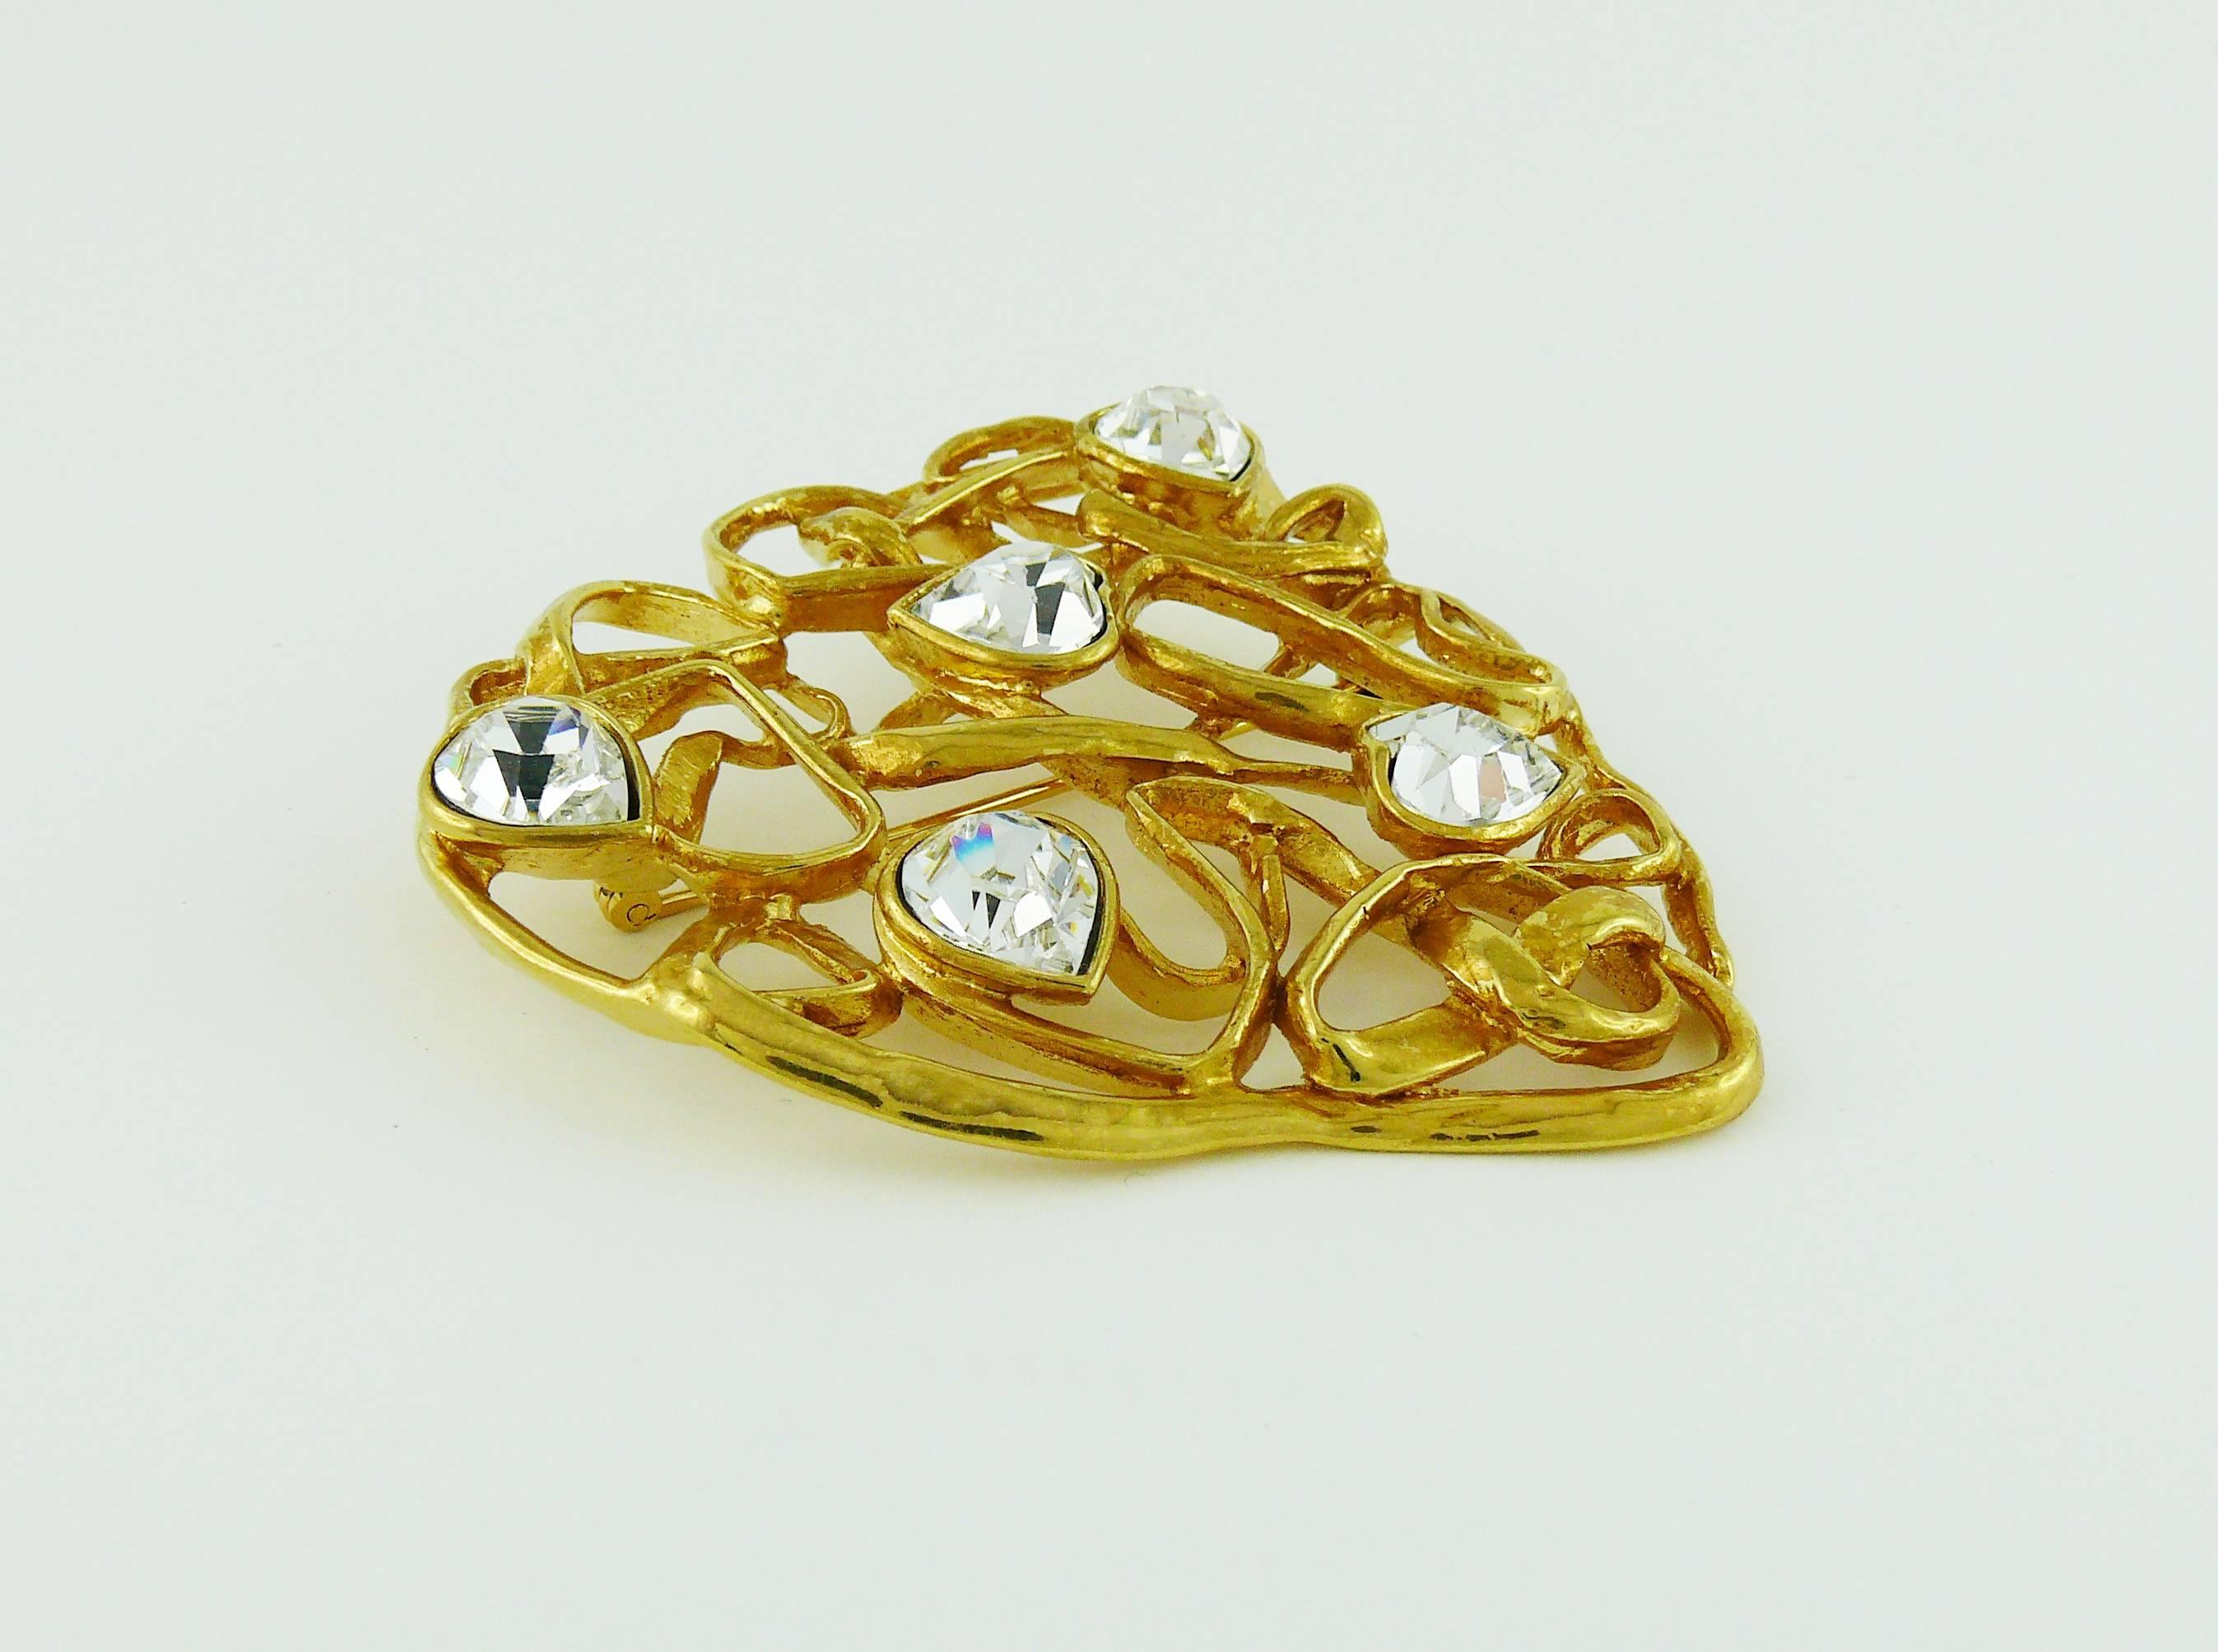 YVES SAINT LAURENT massive vintage wired gold tone heart brooch embellished with heart shaped clear crystals.

Marked YSL Made in France.

JEWELRY CONDITION CHART
- New or never worn : item is in pristine condition with no noticeable imperfections
-